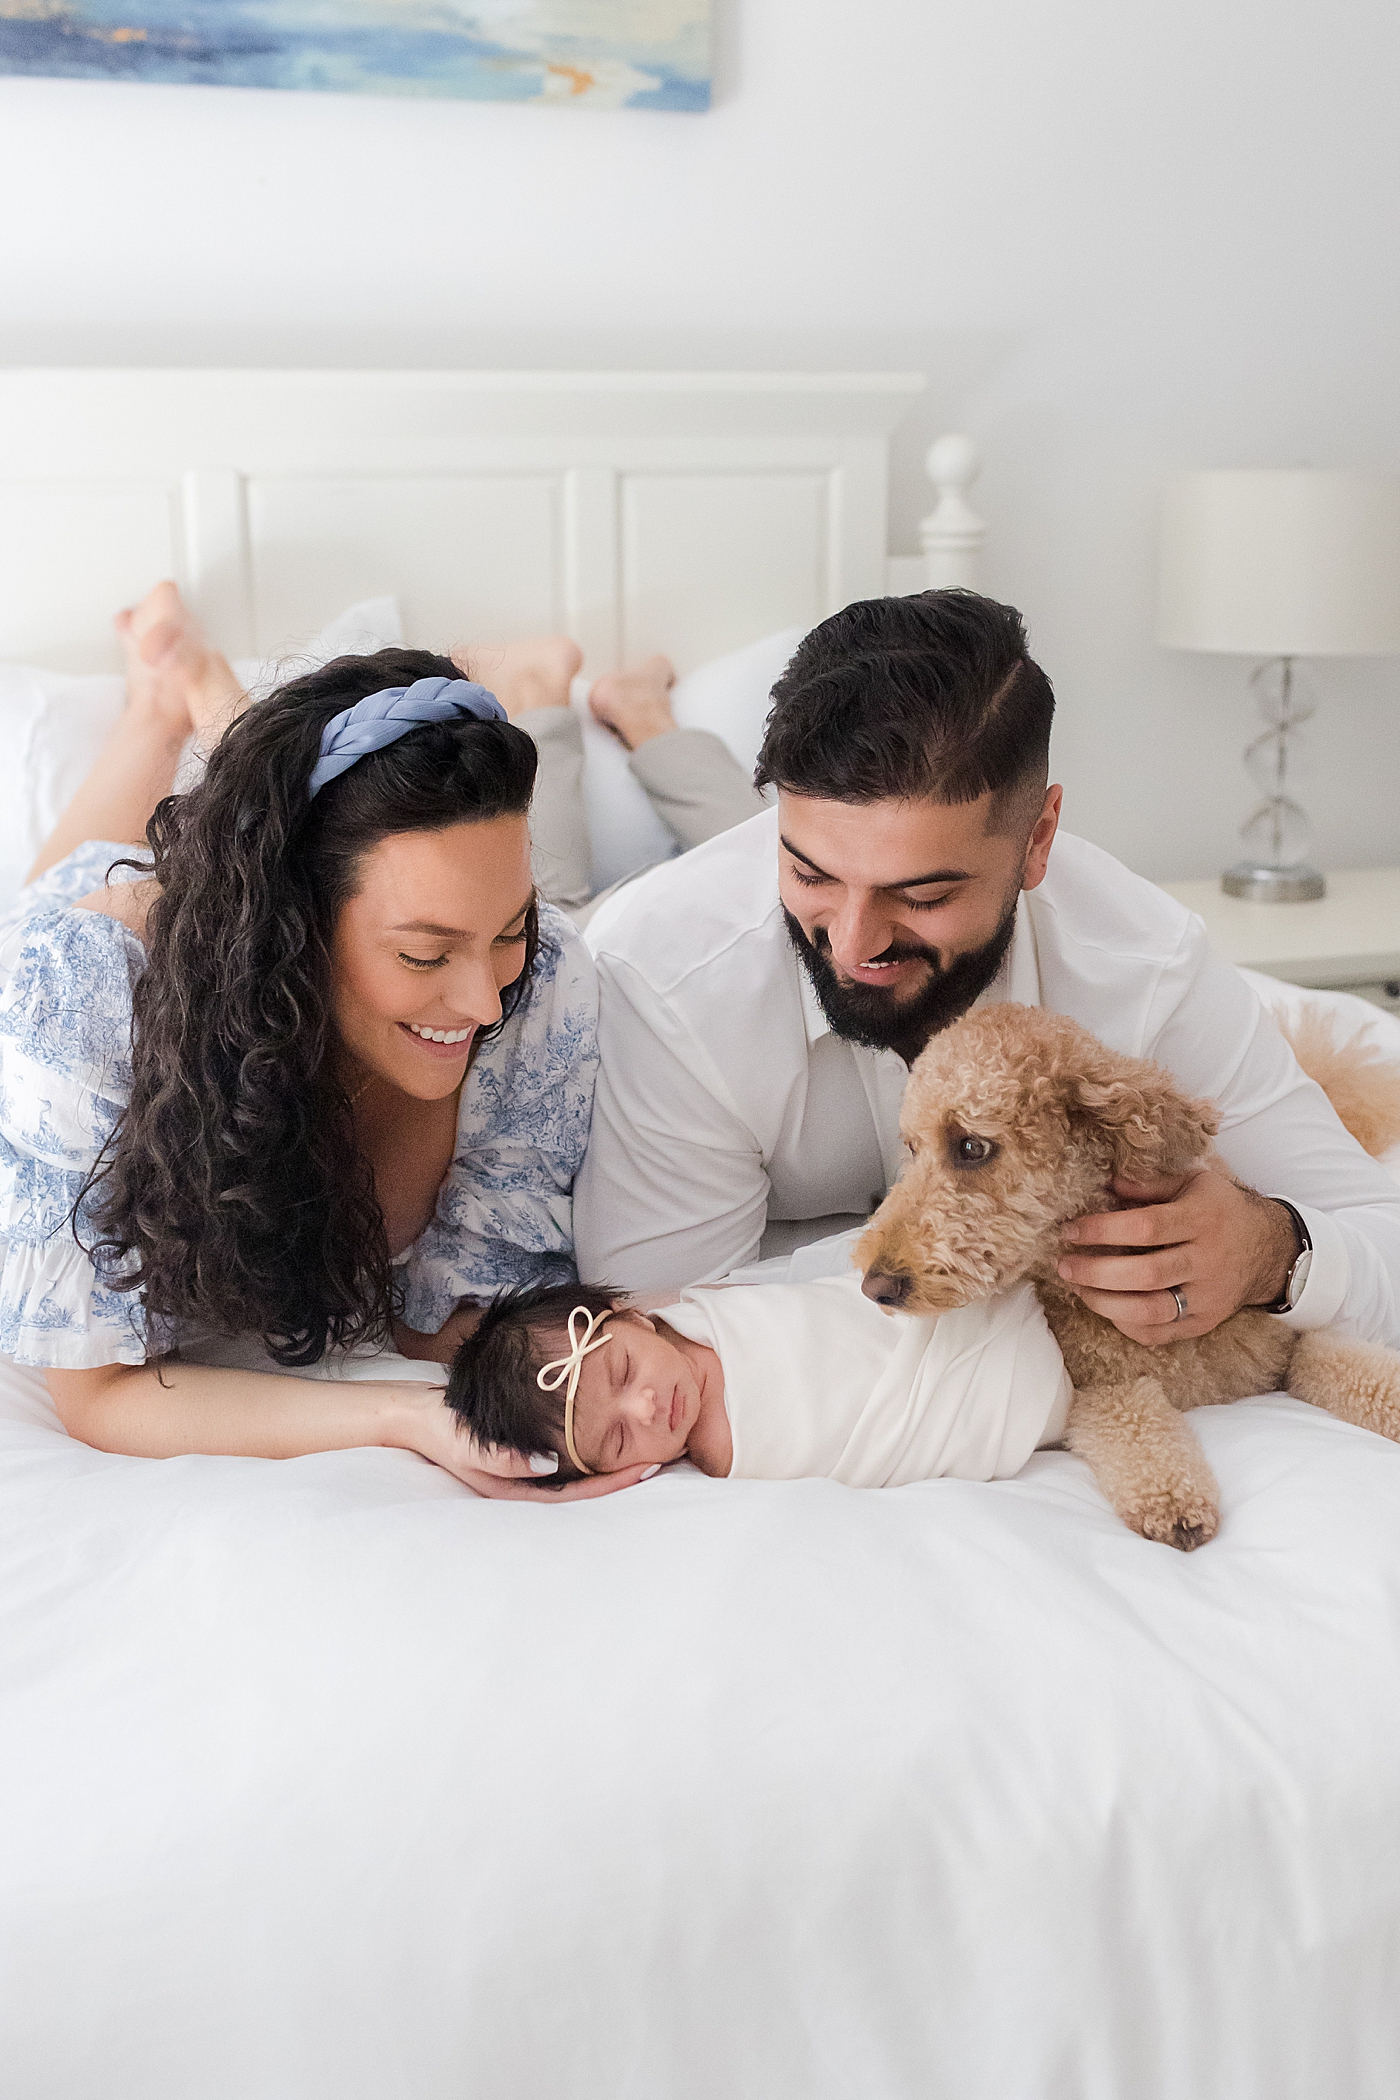 Mom and dad snuggling with their newborn baby and dog | Image by Emily Gerald